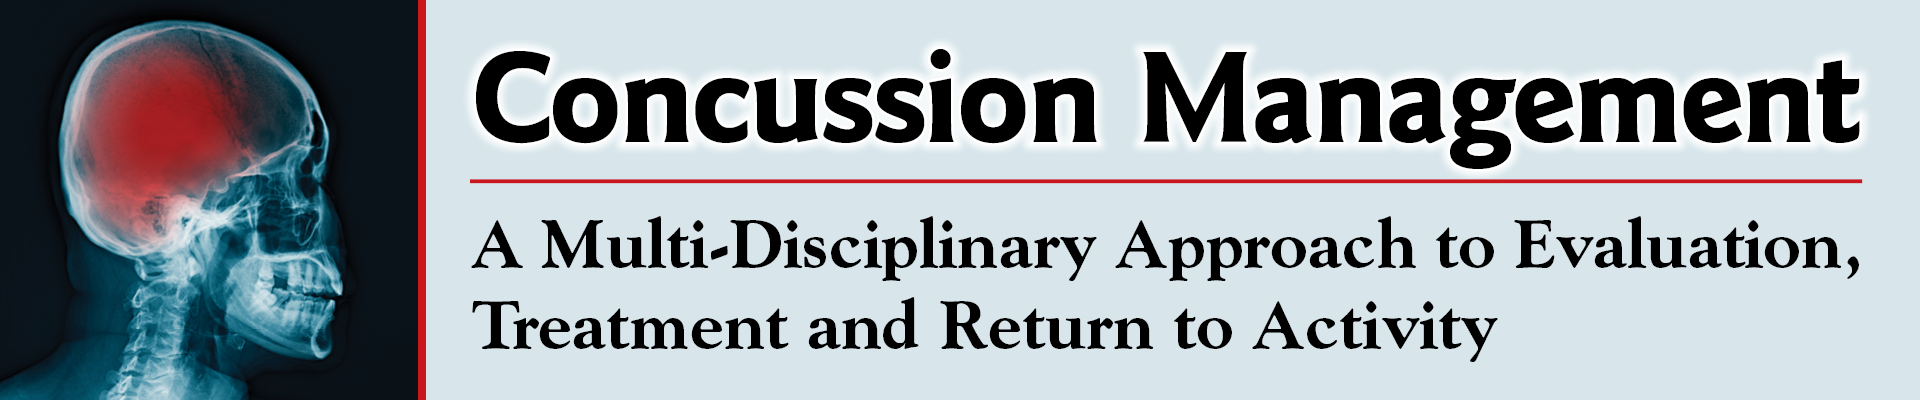 Concussion Management: A Multi-Disciplinary Approach to Evaluation, Treatment and Return to Activity